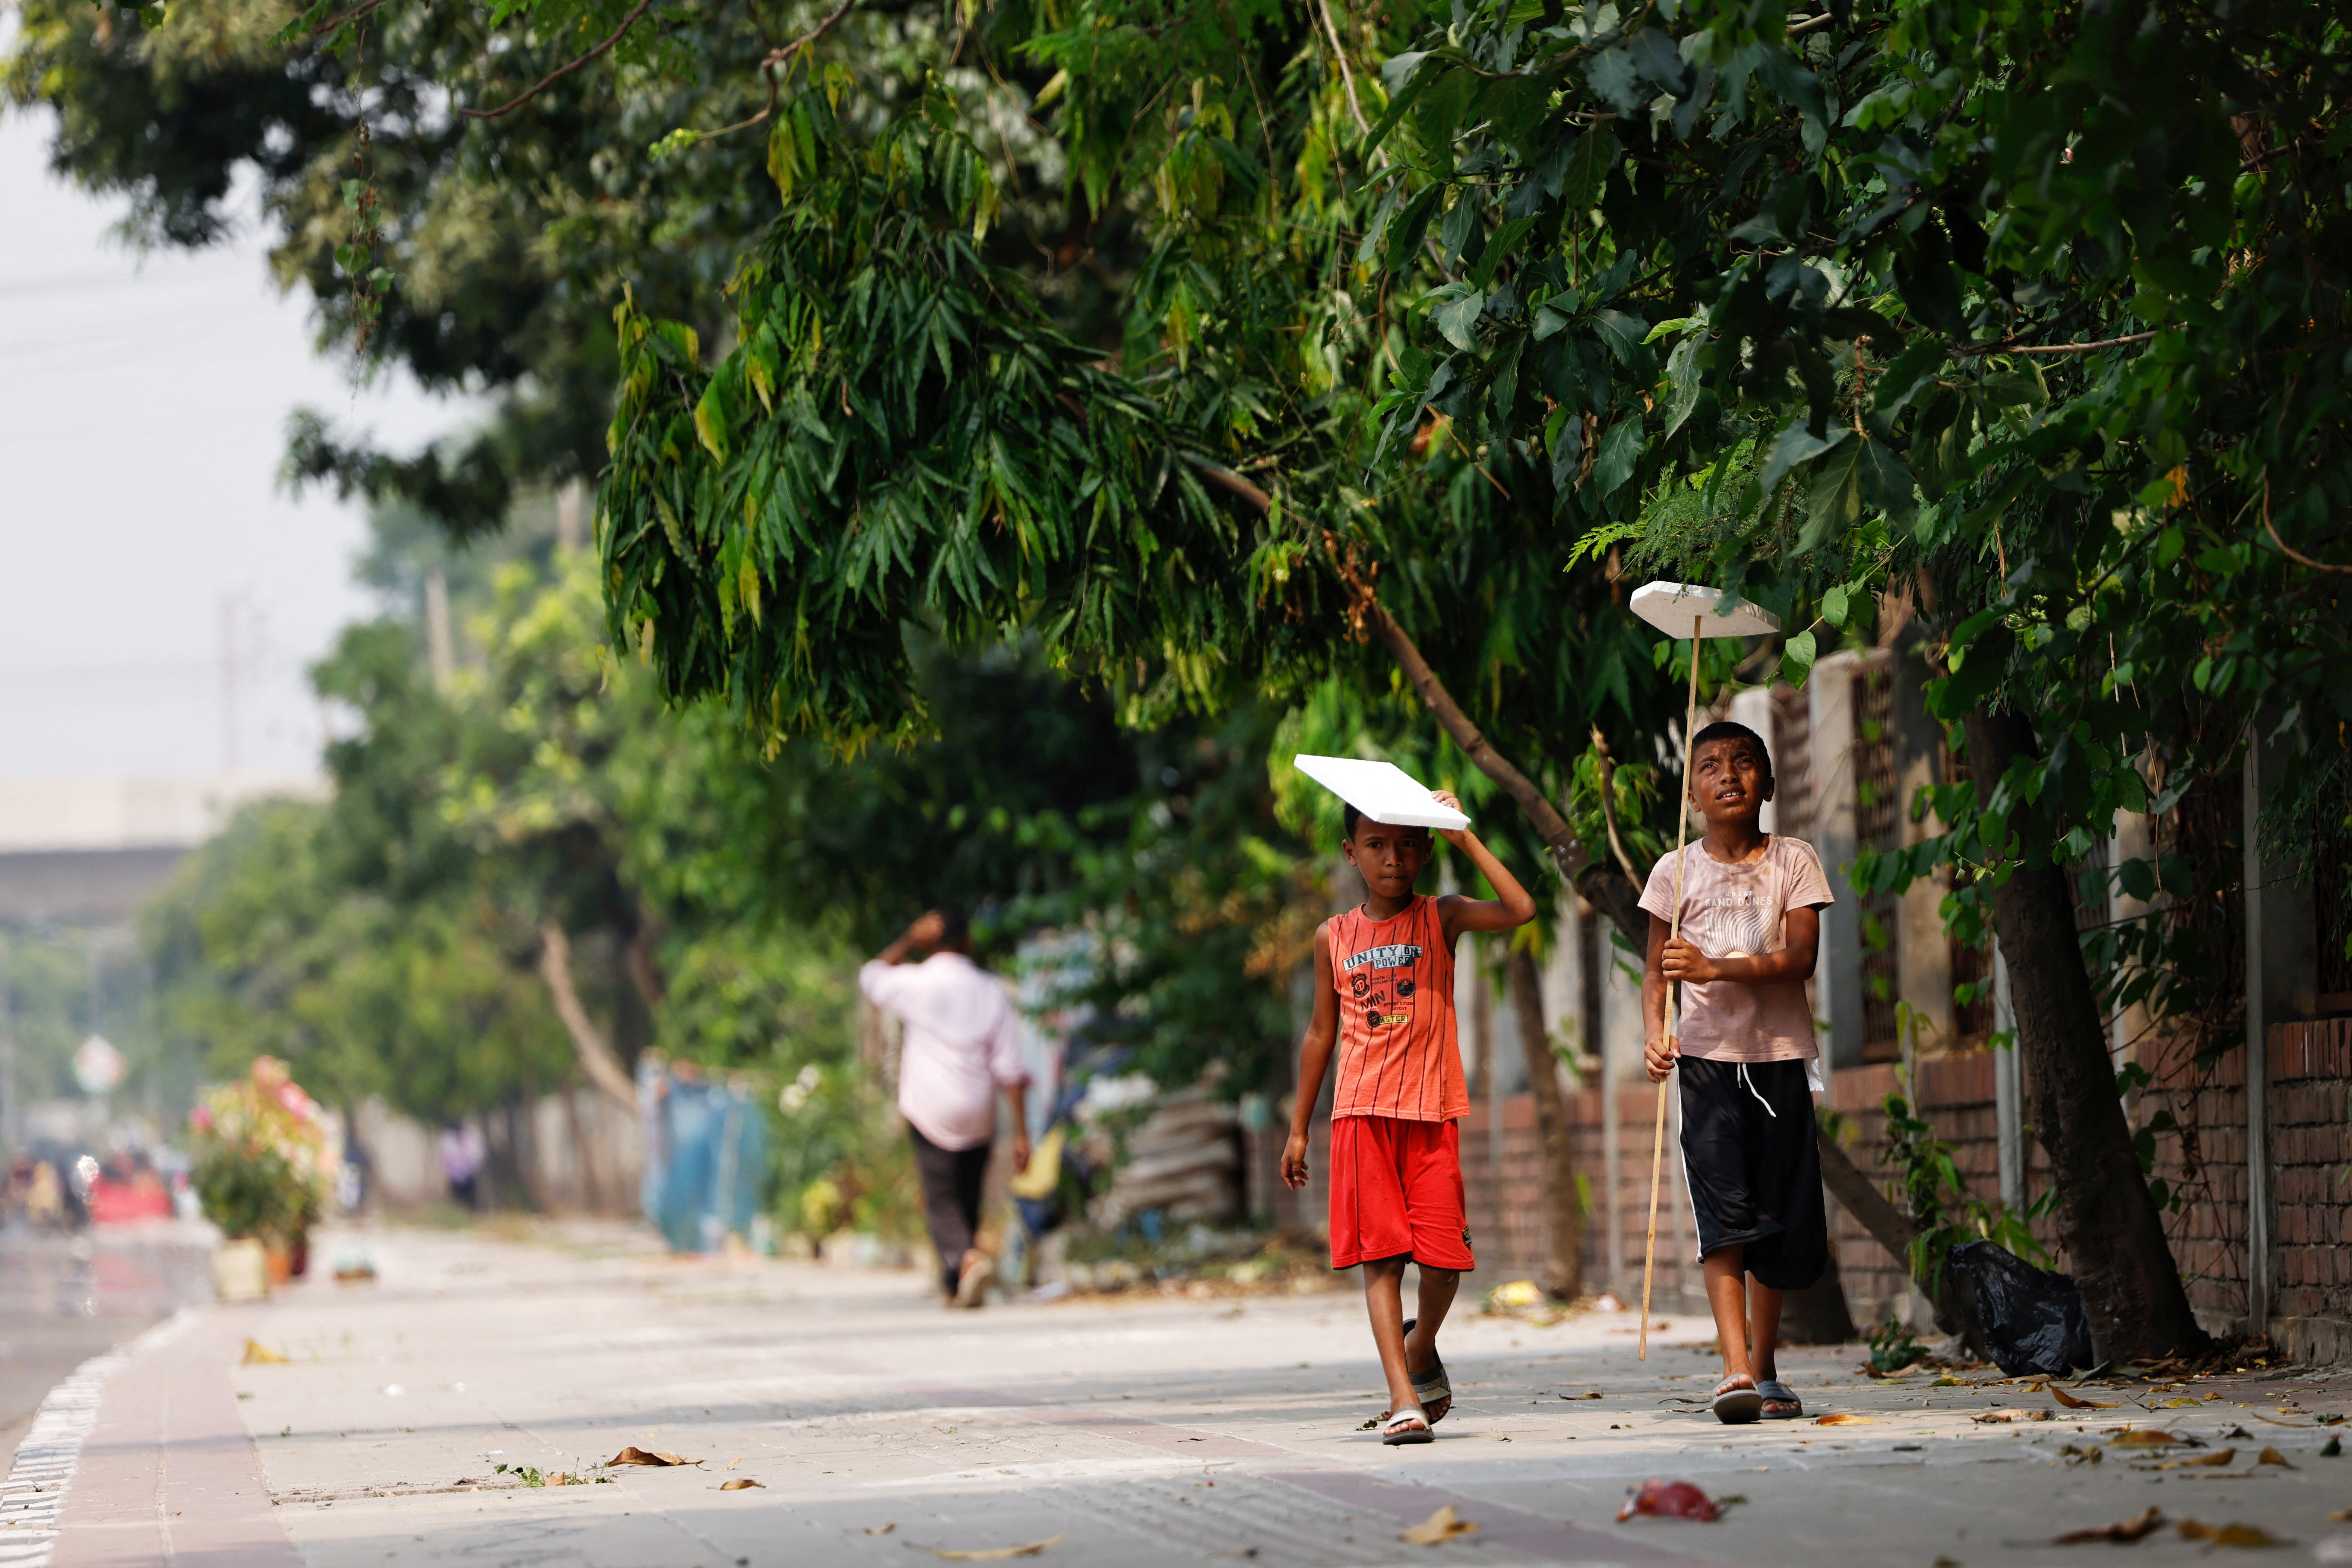 Children hold cork sheets to cover them from the sun while walking along a street during a countrywide heatwave in Dhaka